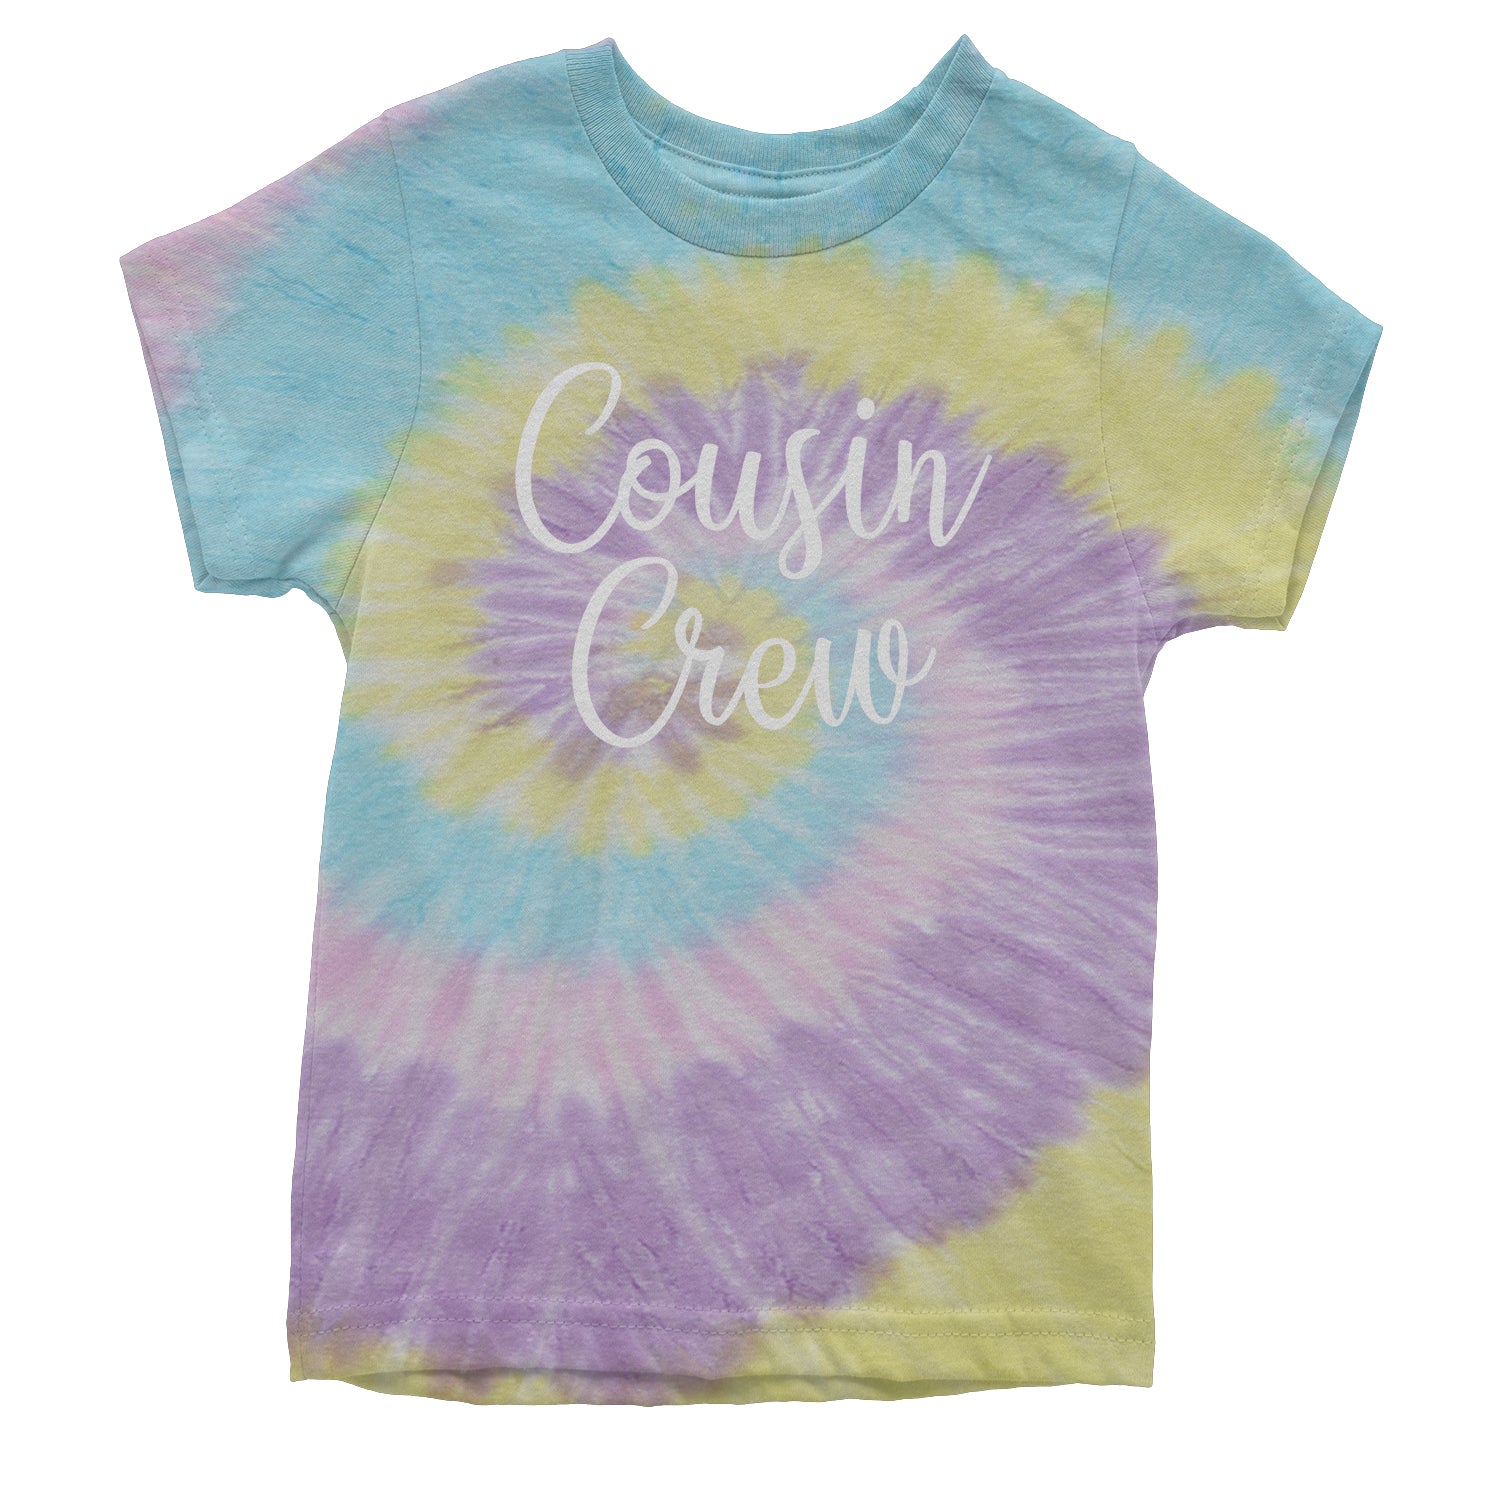 Cousin Crew Fun Family Outfit Youth T-shirt barbecue, bbq, cook, family, out, reunion by Expression Tees